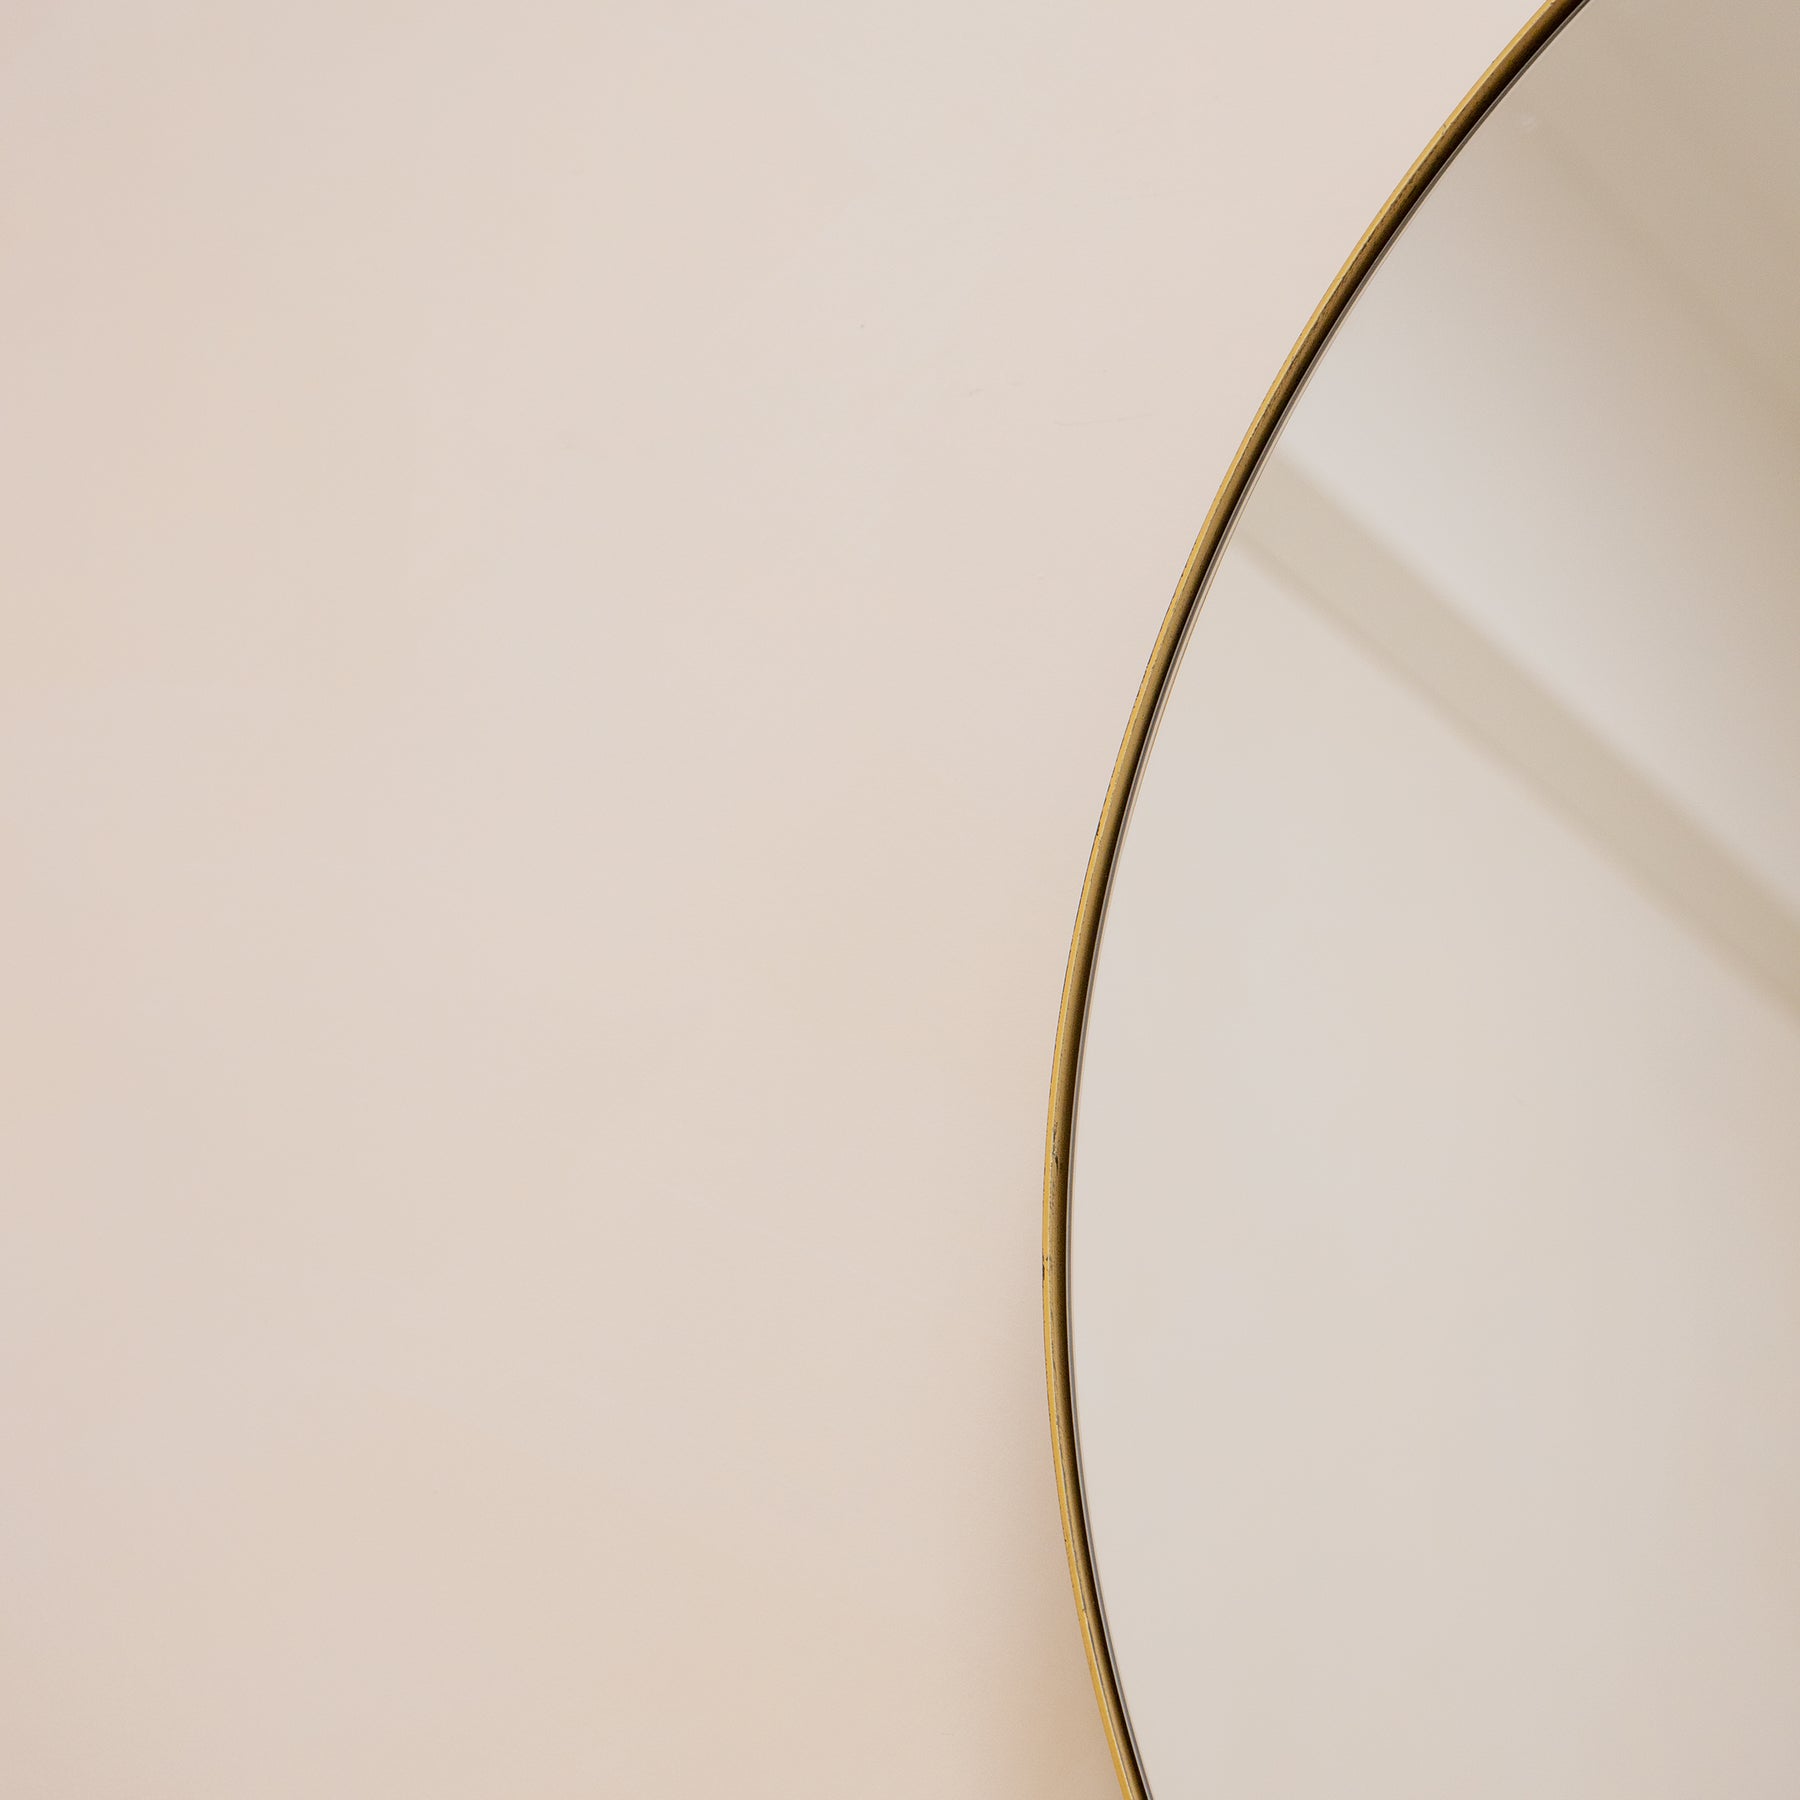 Detail shot of Gold Round Metal Large Wall Mirror curved frame